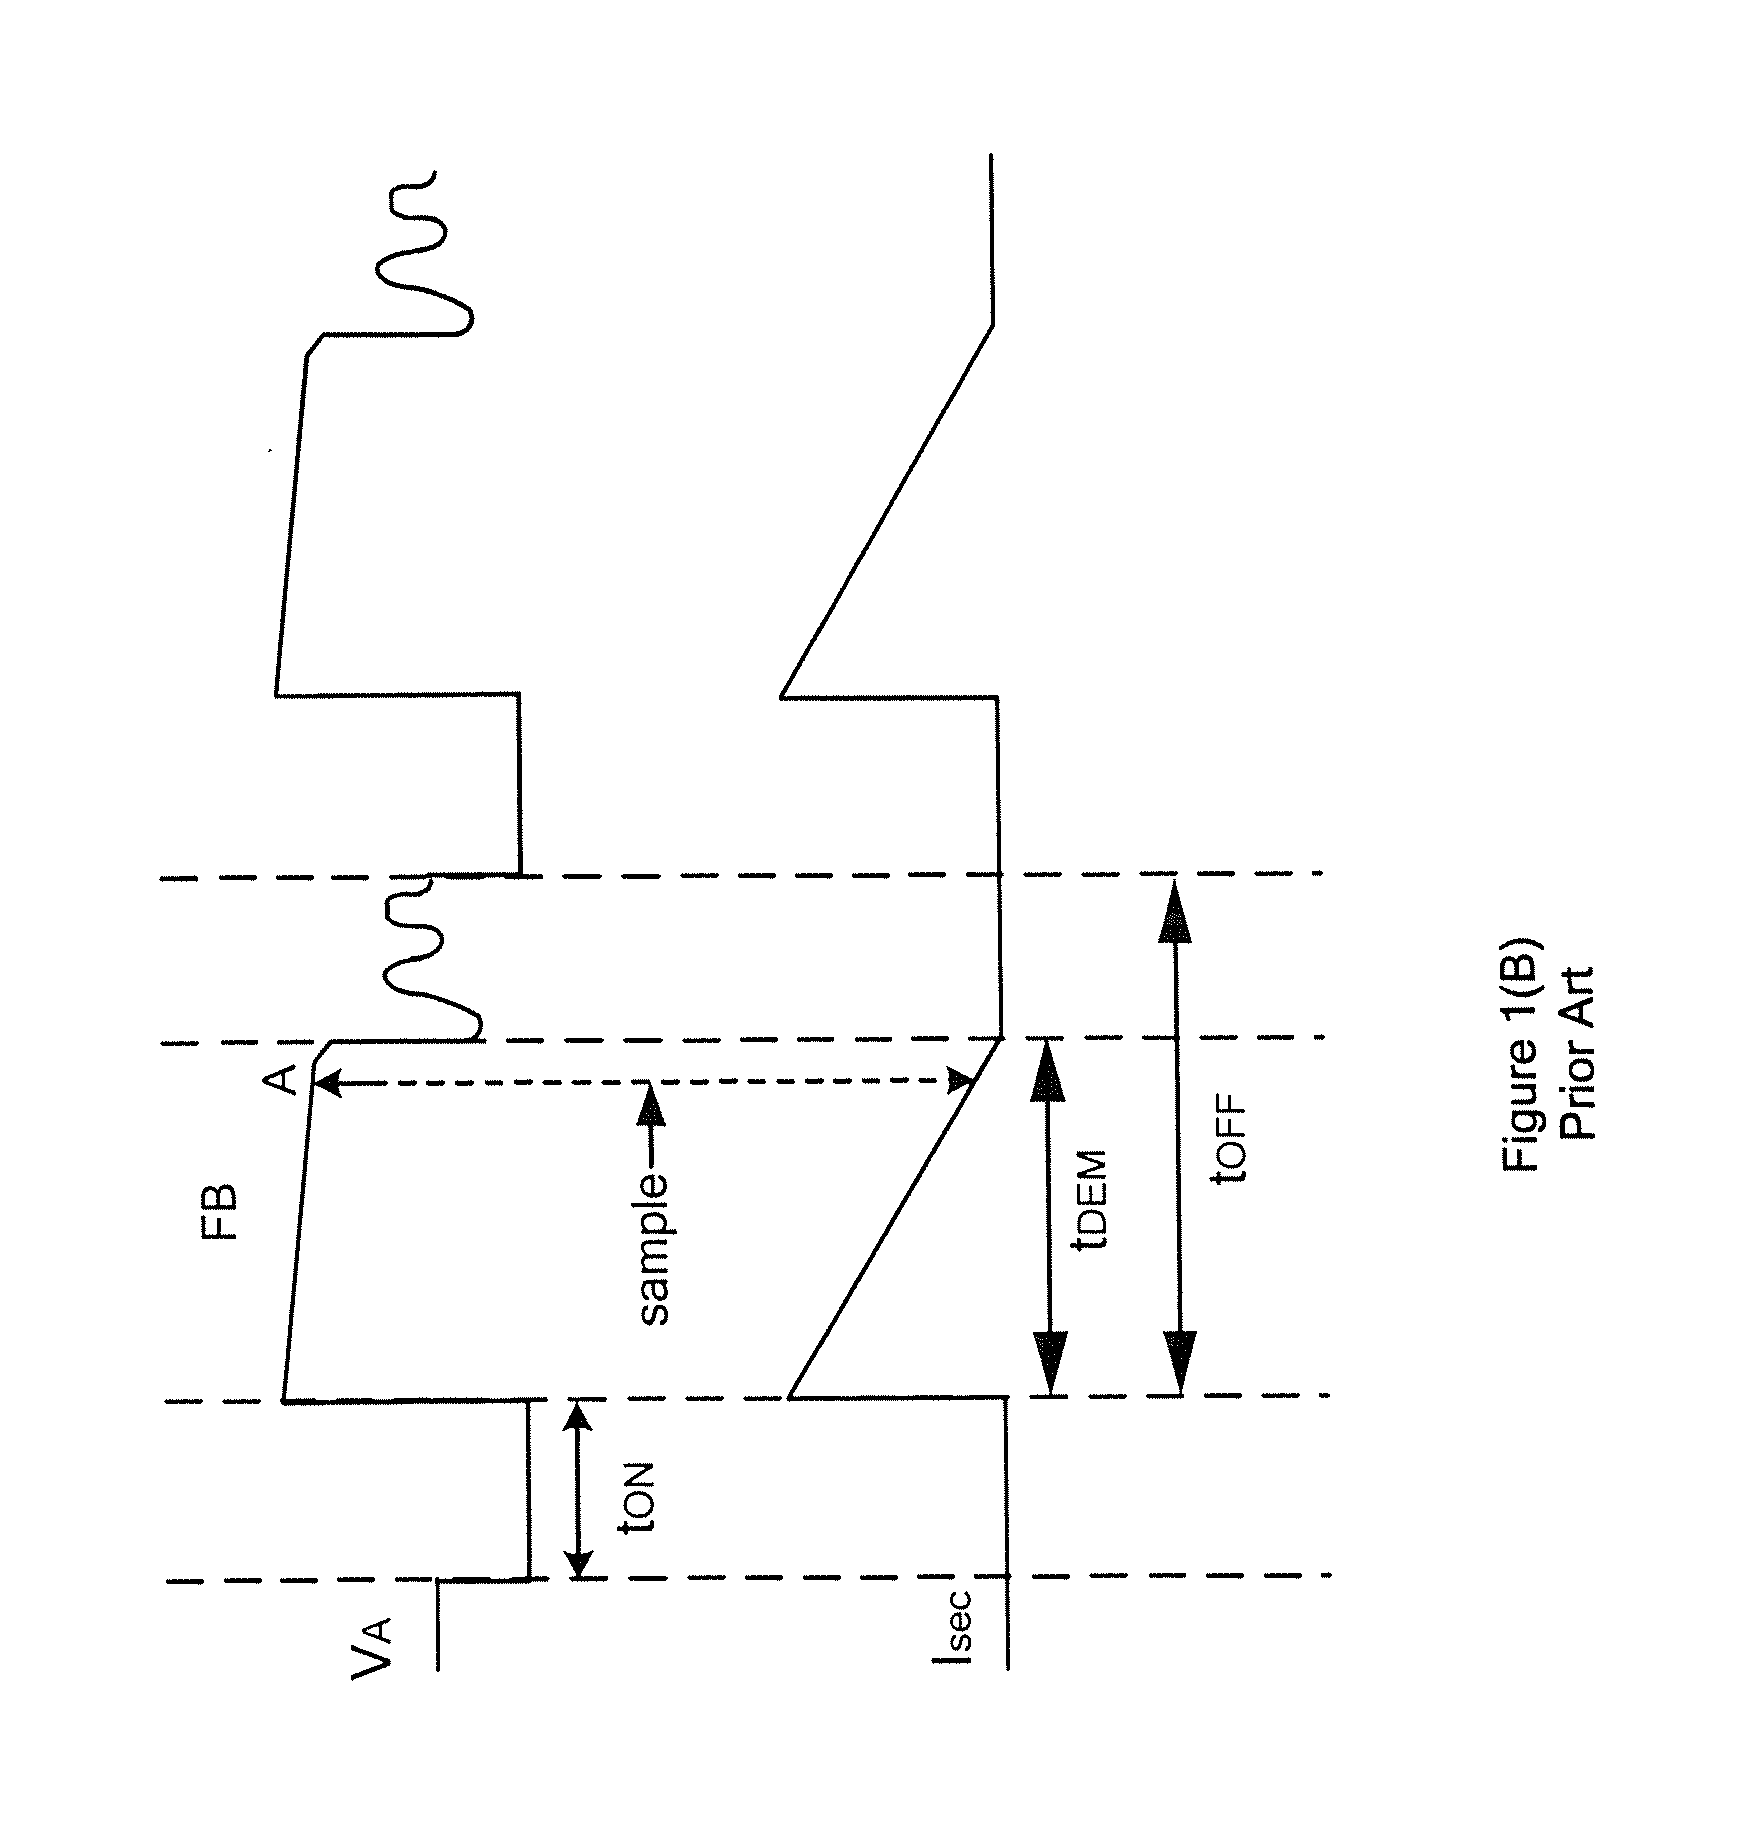 Systems and methods for adjusting frequencies and currents based on load conditions of power conversion systems